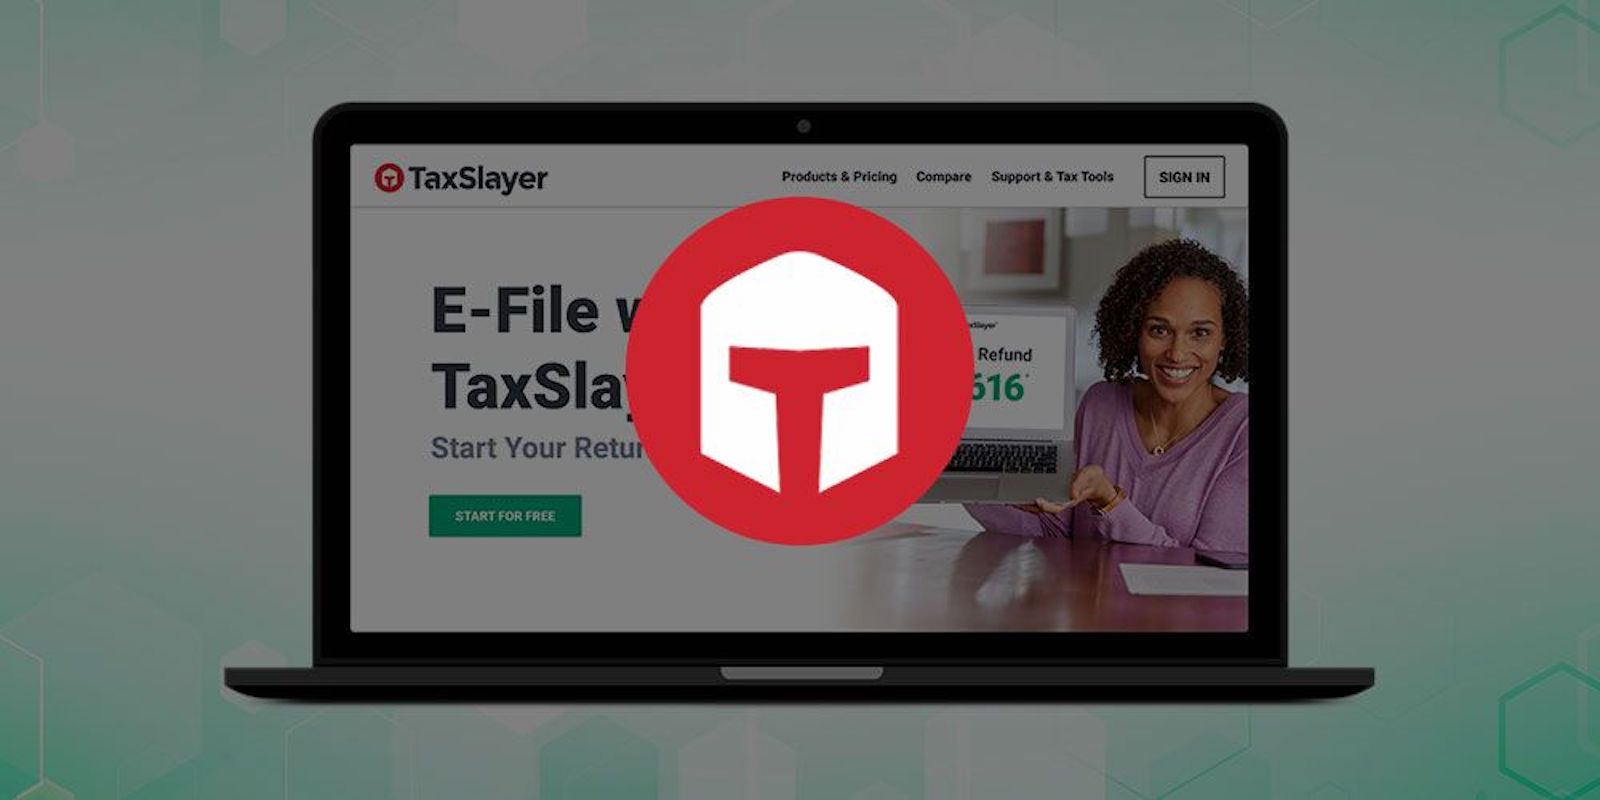 Make your taxes quick and painless this year [Deals]